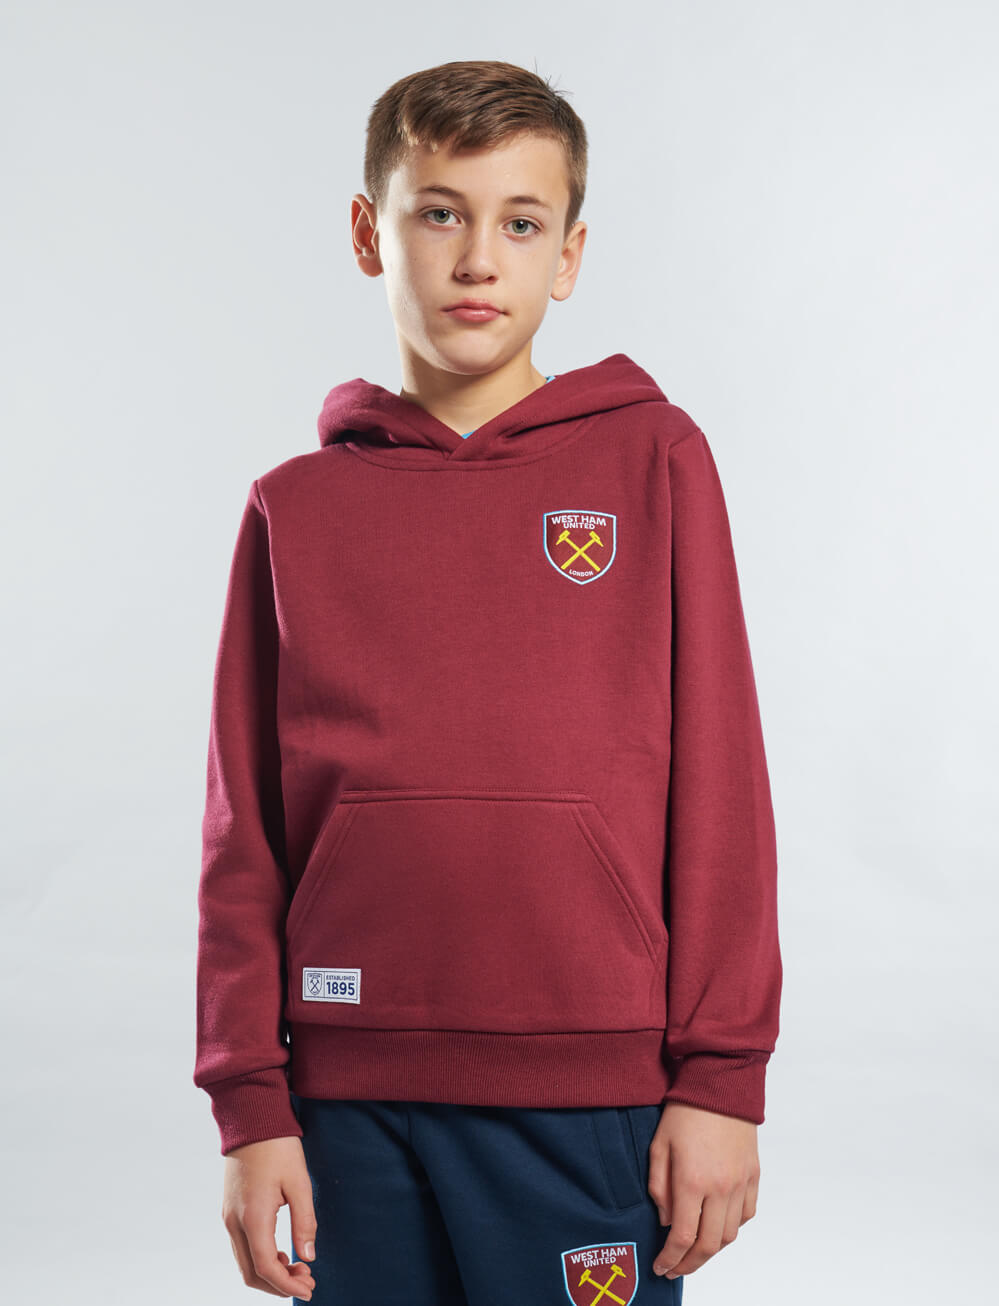 Official West Ham United Kids Crest Hoodie - Claret - The World Football Store